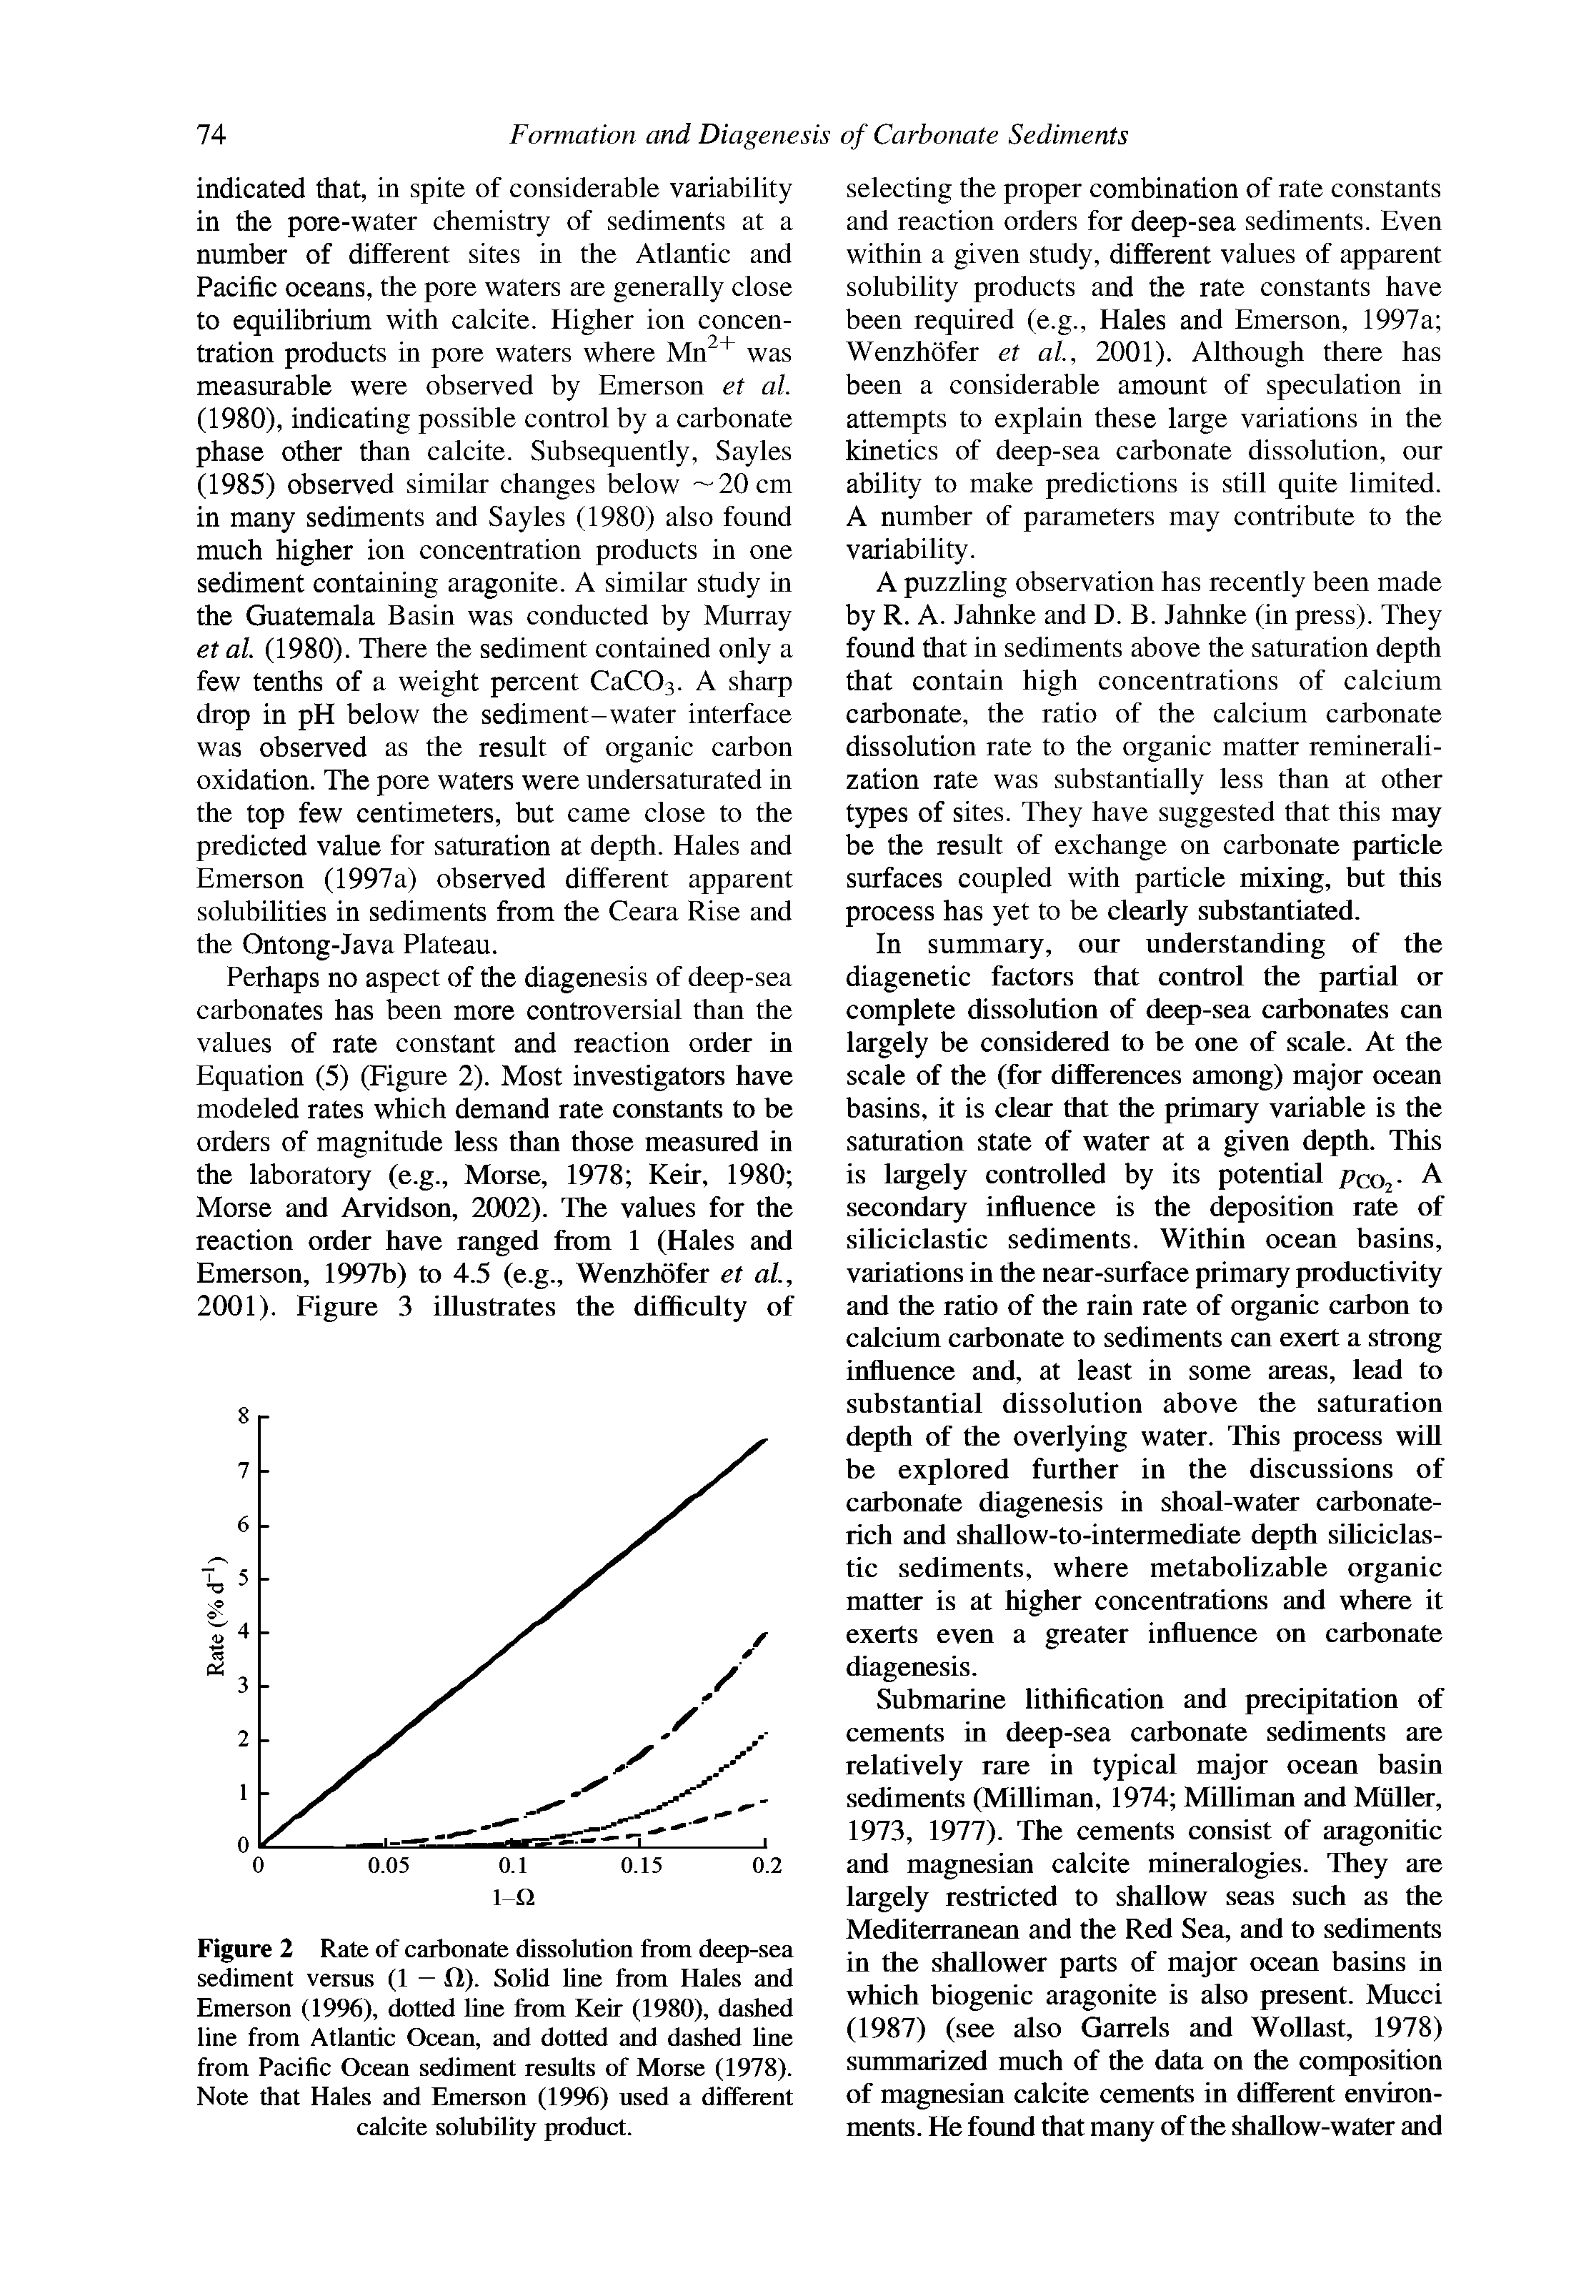 Figure 2 Rate of carbonate dissolution from deep-sea sediment versus (1 — O). SoUd Une from Hales and Emerson (1996), dotted line from Keir (1980), dashed line from Atlantic Ocean, and dotted and dashed line from Pacific Ocean sediment results of Morse (1978). Note that Hales and Emerson (1996) used a different calcite solubility product.